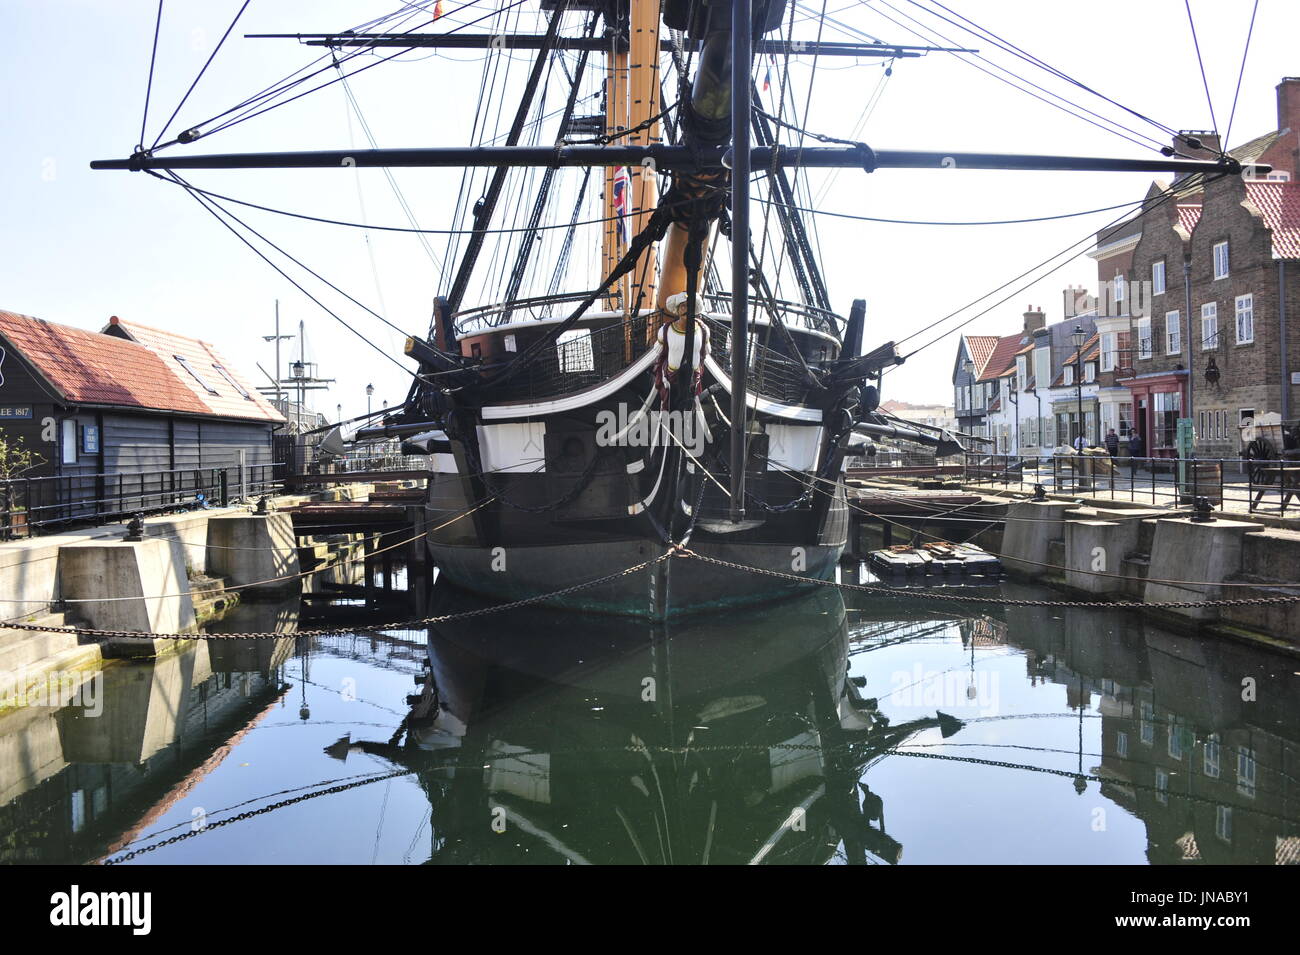 AJAXNETPHOTO. - 19TH JULY, 2016. HARTLEPOOL, ENGLAND. - HISTORICAL SHIP MUSEUM - THE RESTORED 19TH CENTURY FRIGATE HMS TRINCOMALEE (EX T.S.FOUDROYANT, EX TRINCOMALEE.). PHOTO:TONY HOLLAND/AJAX REF:DTH161907 32305 Stock Photo